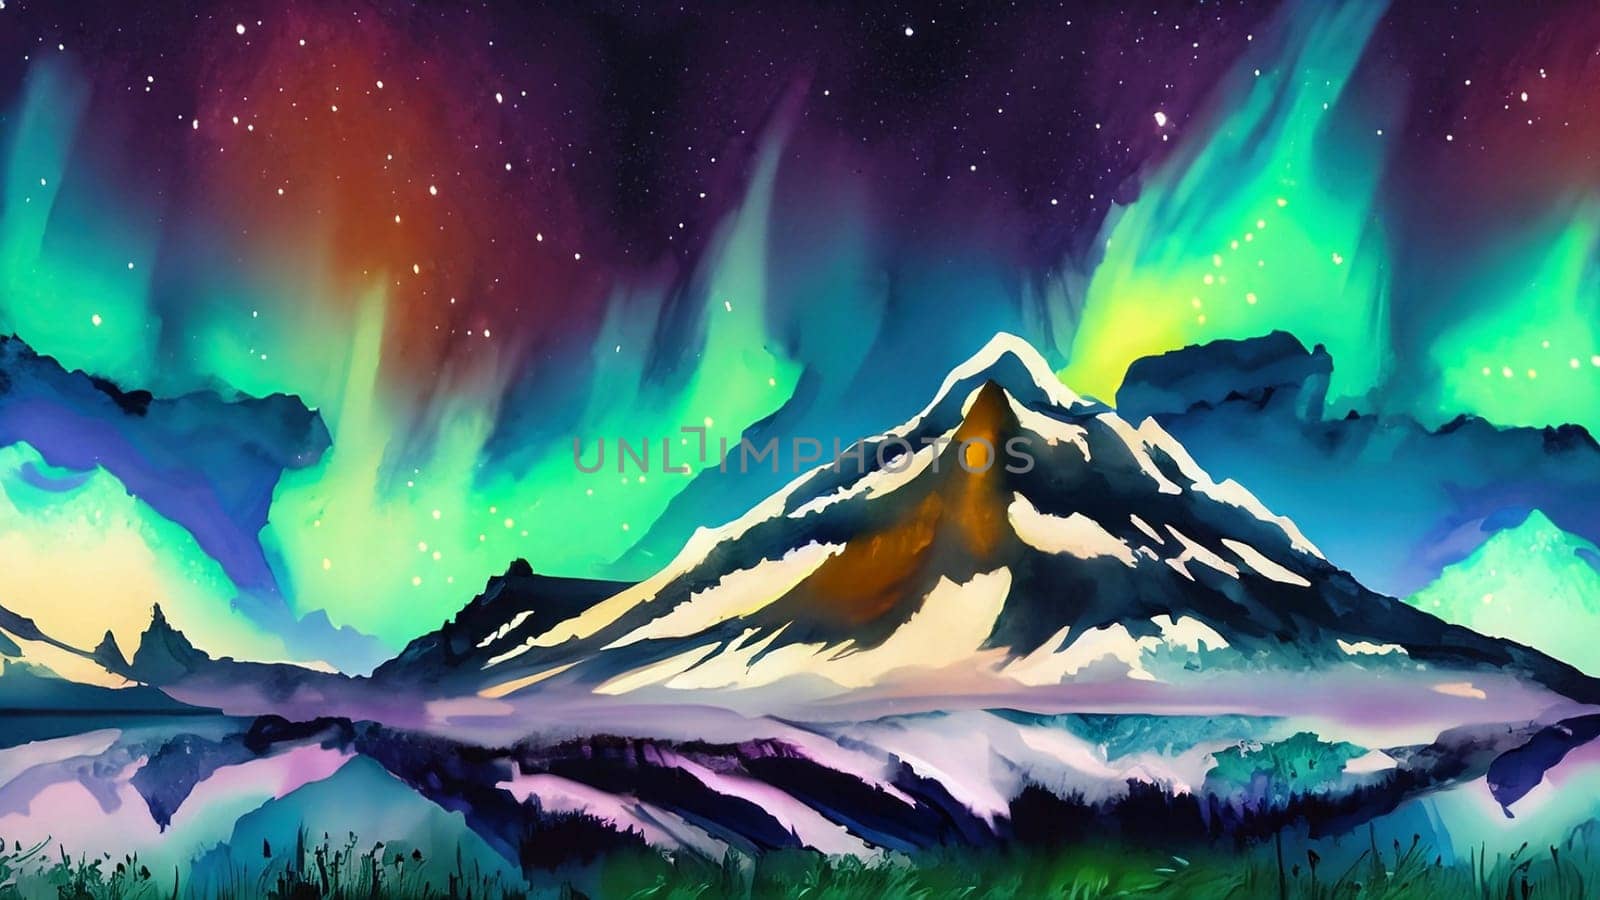 Northern lights in the night sky over the mountains. Abstract painting. Impressionist style. Imitation of oil painting. Painting for interior. Digital illustration. by Costin